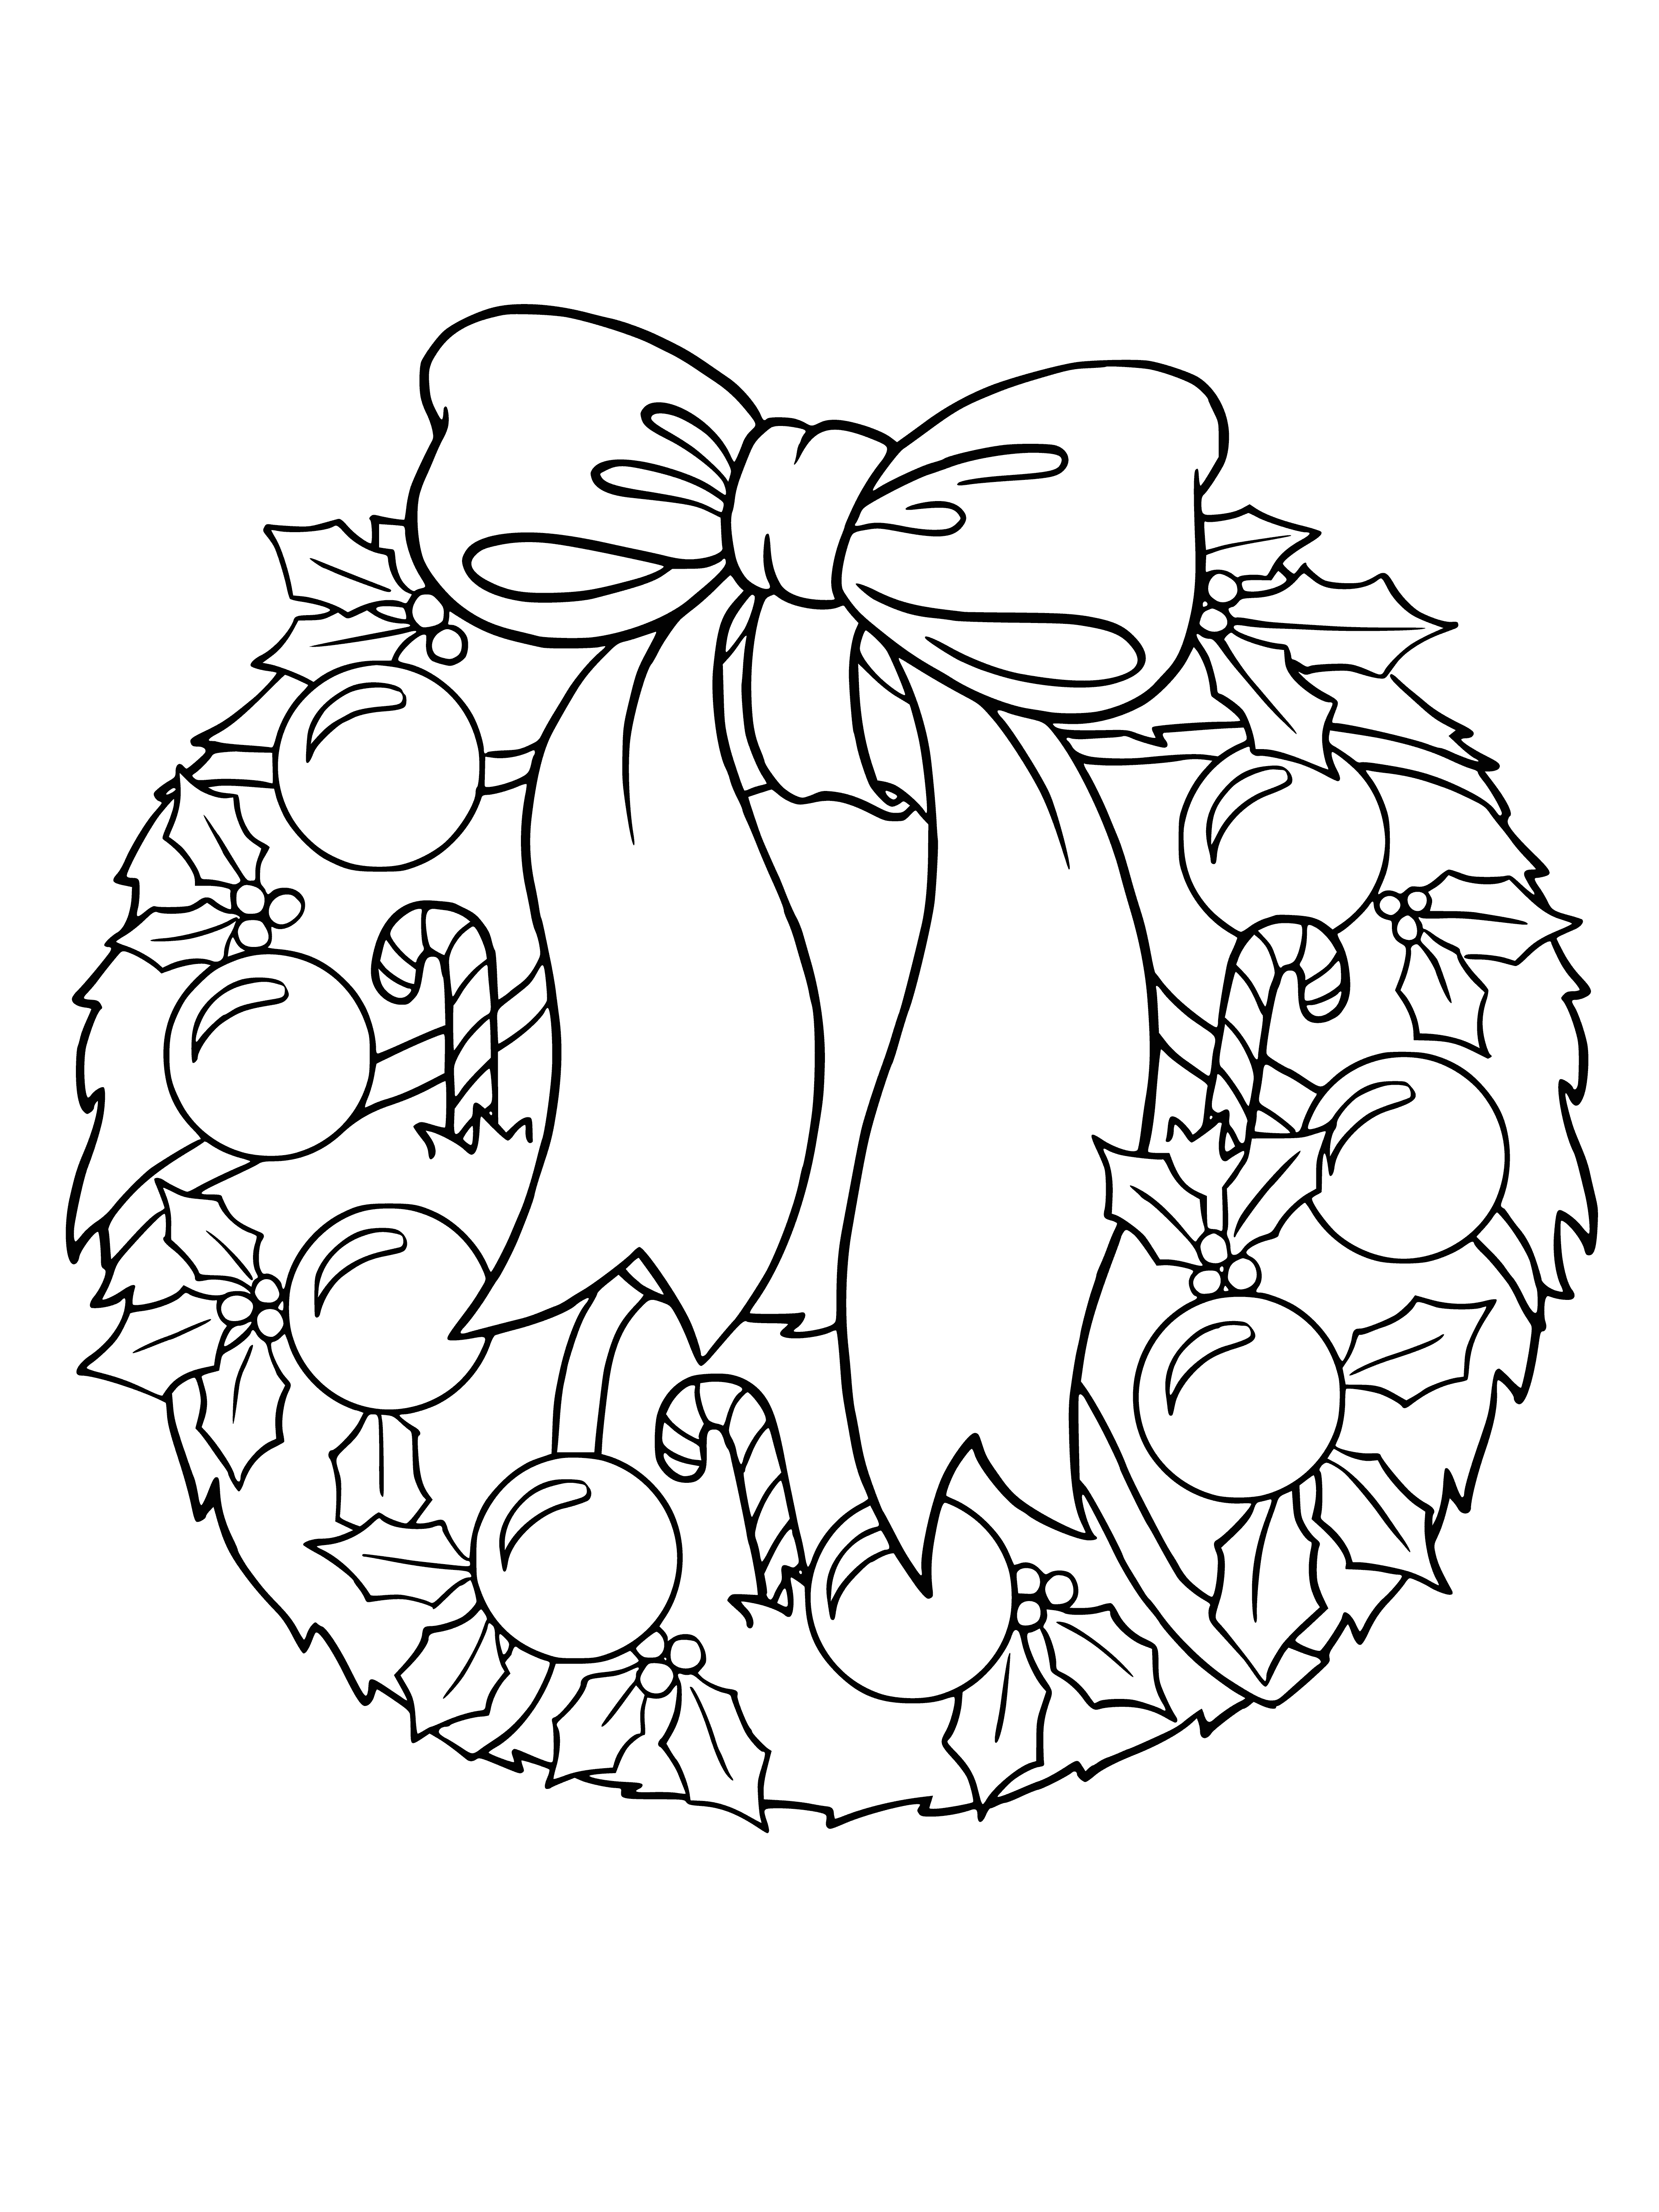 coloring page: Circular wreath of greenery, white ribbon, red berries, pinecones & red bow - perfect for adding a festive feel to any holiday display!